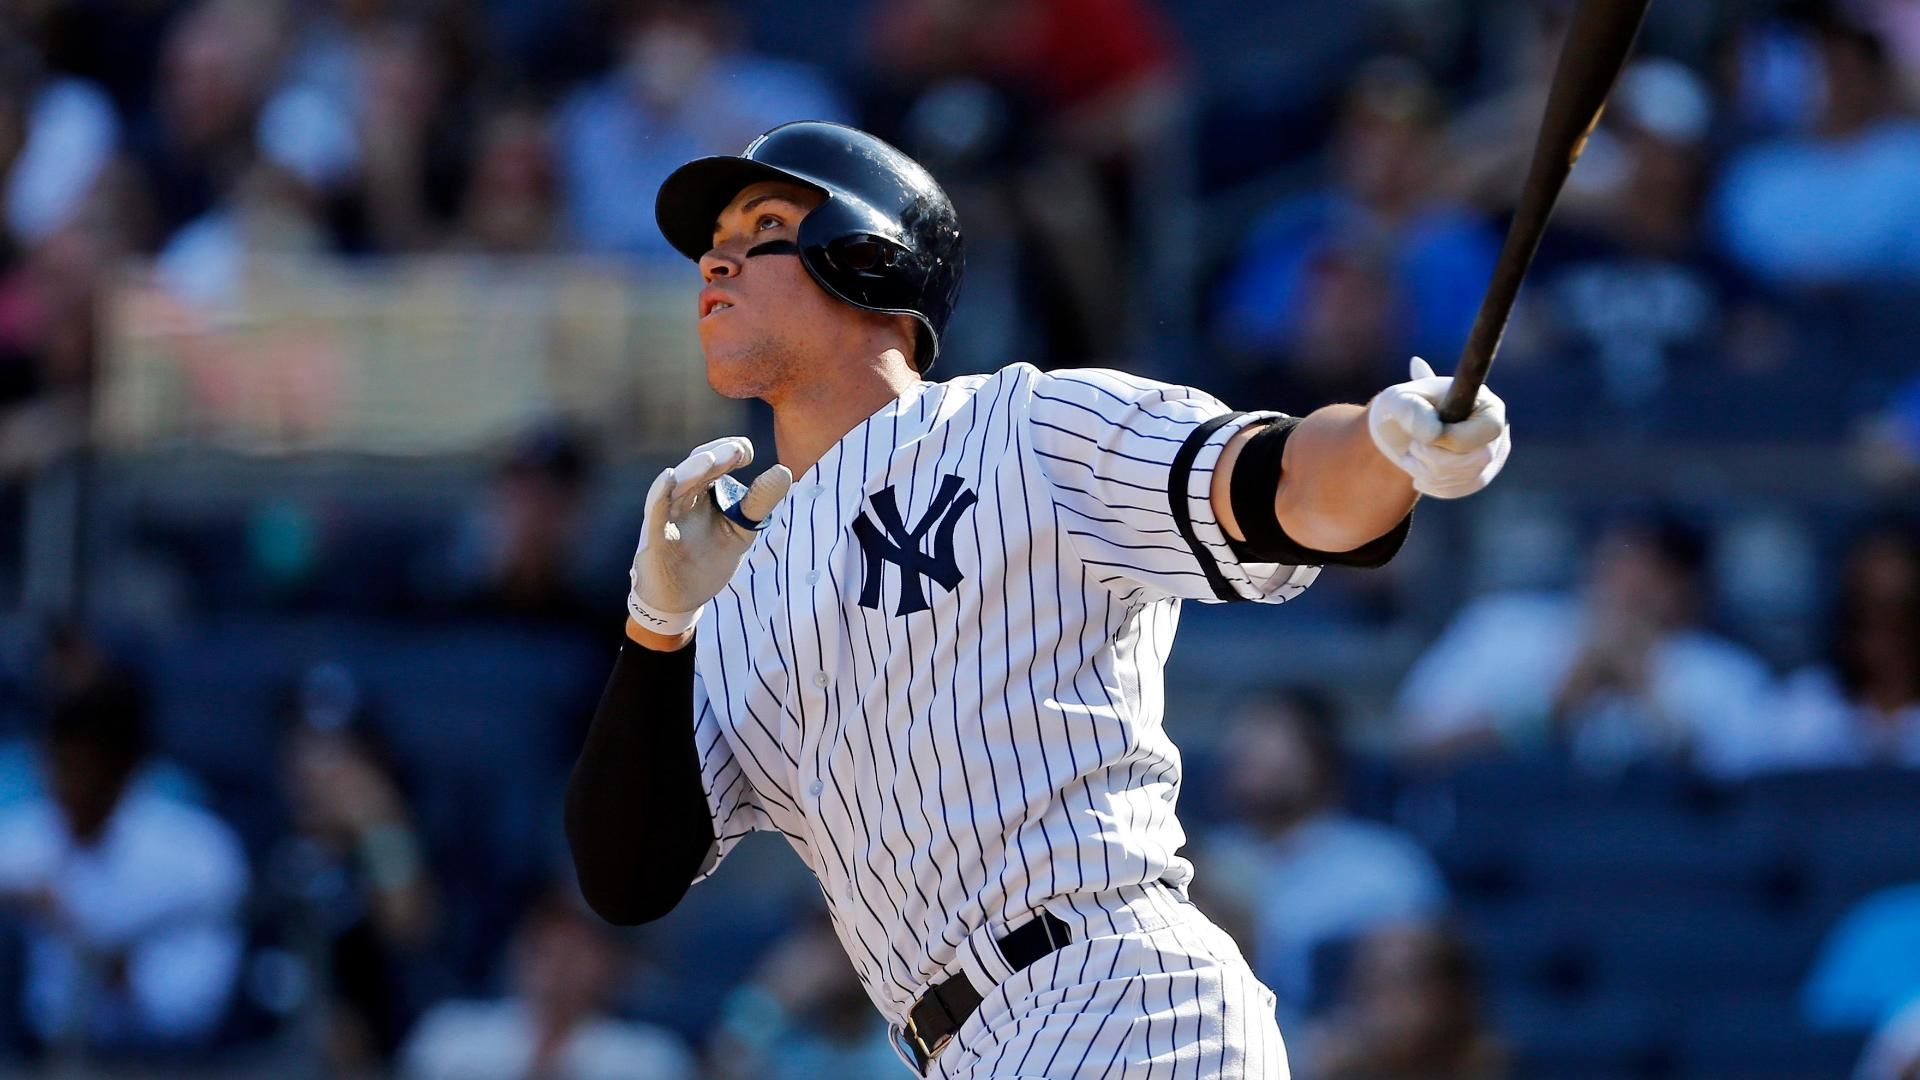 Yankees' Aaron Judge tops MLB jersey sales for 3rd year running